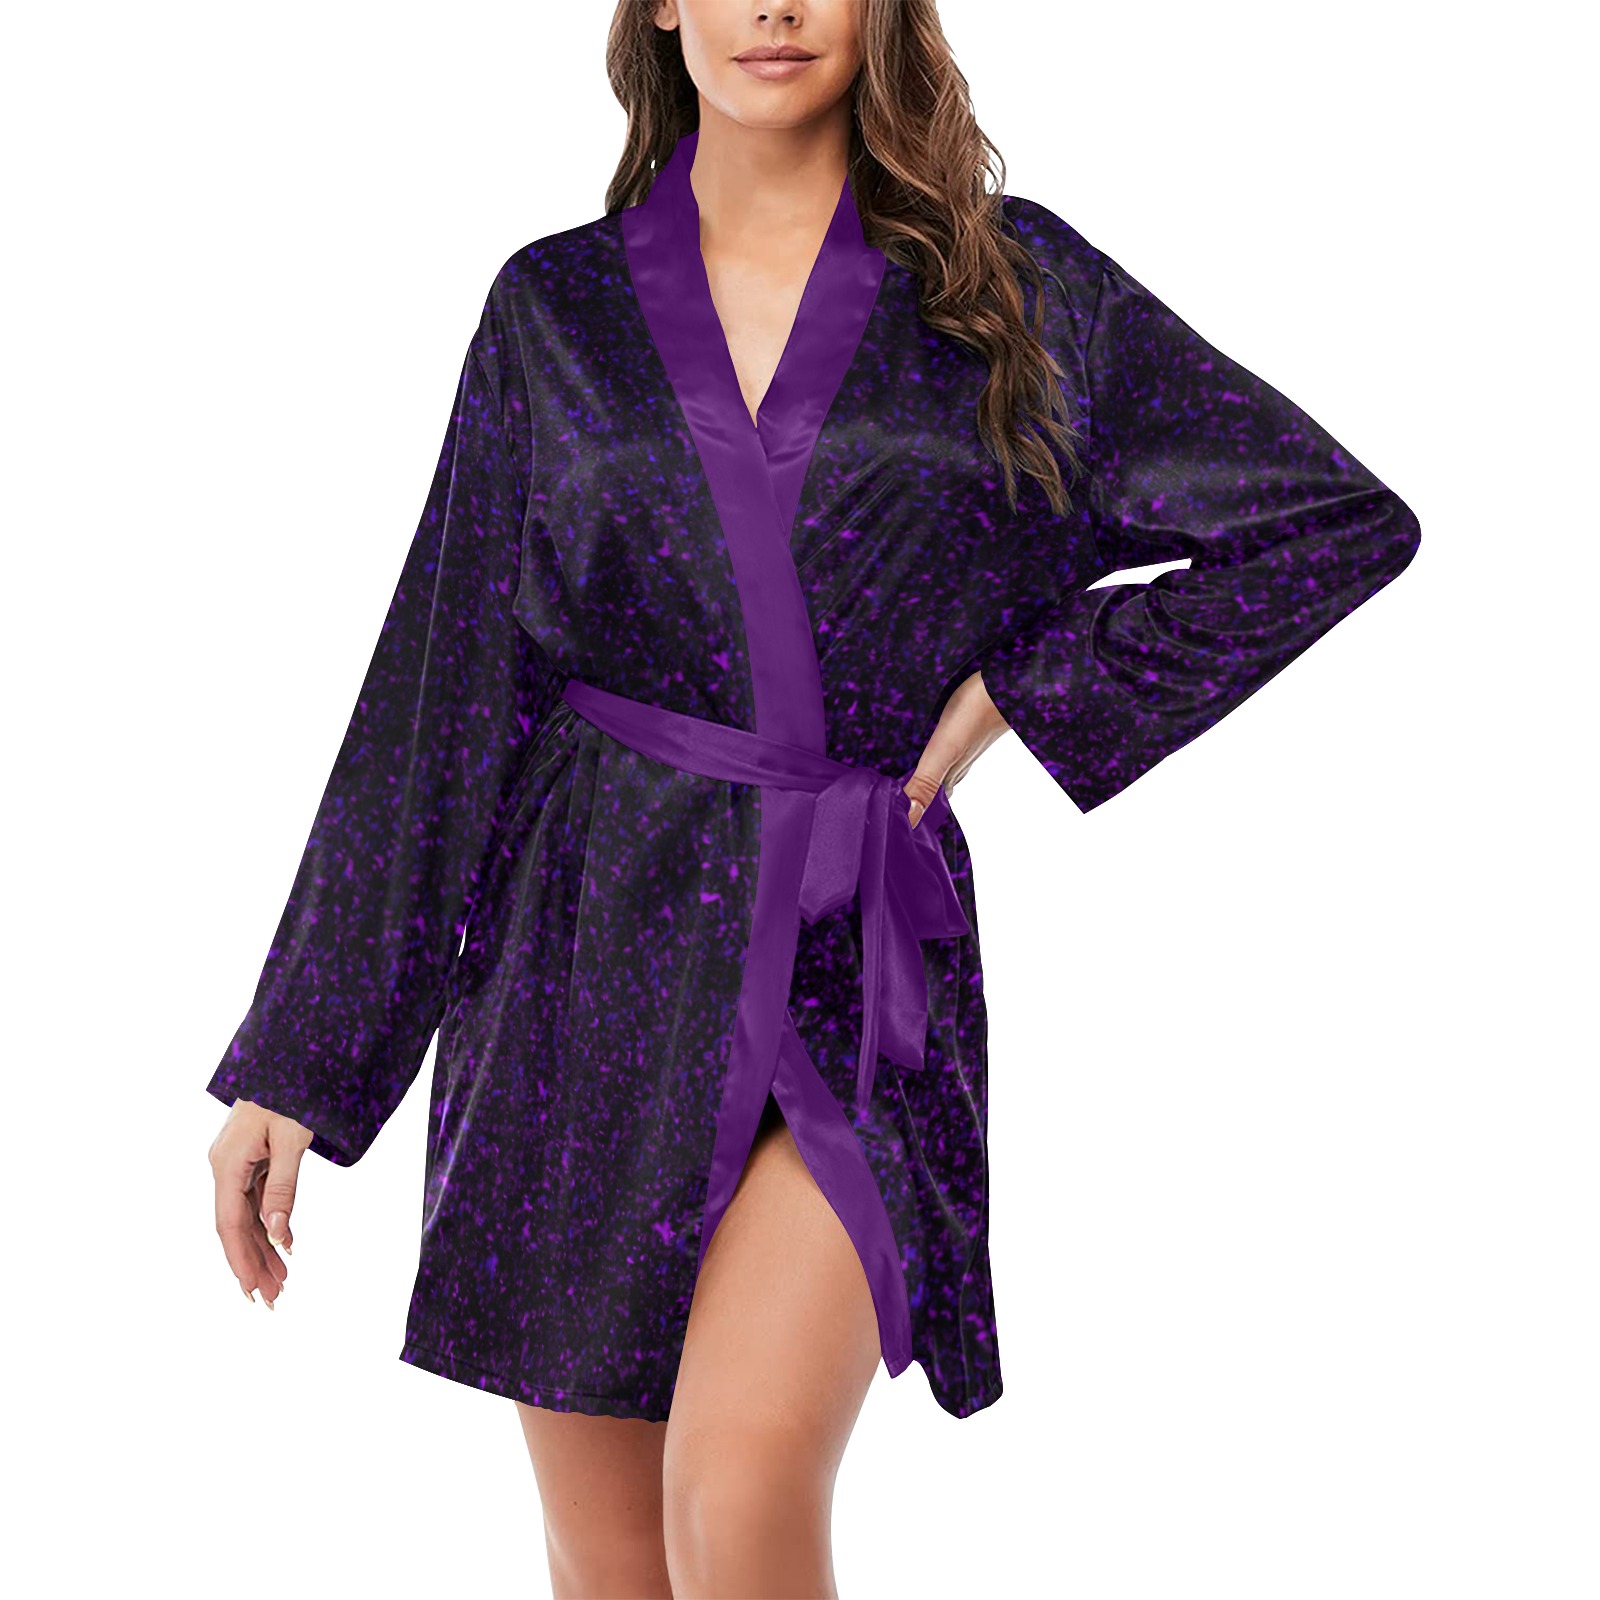 Ô Lavender and Blue Night Sky Women's Long Sleeve Belted Night Robe